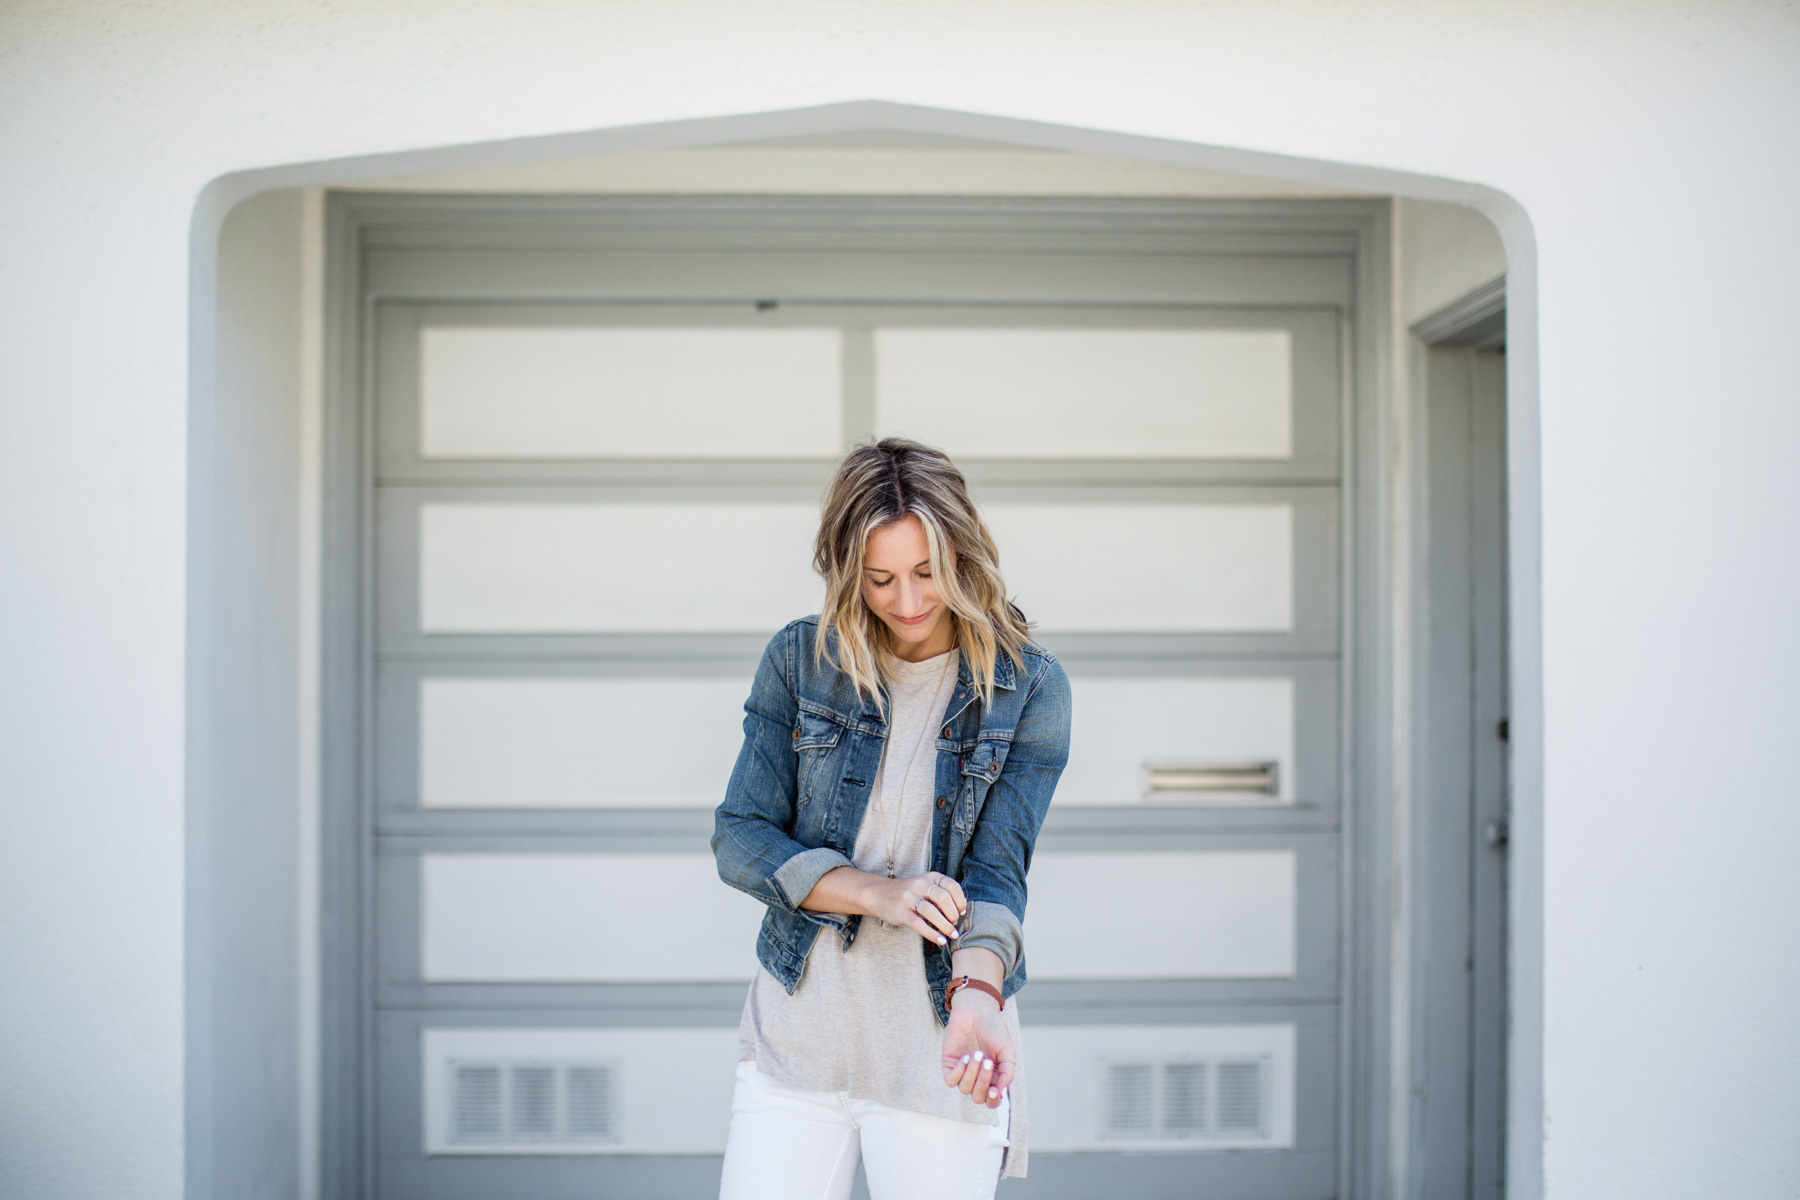 basic outfits with white jeans, tee shirt, and denim jacket